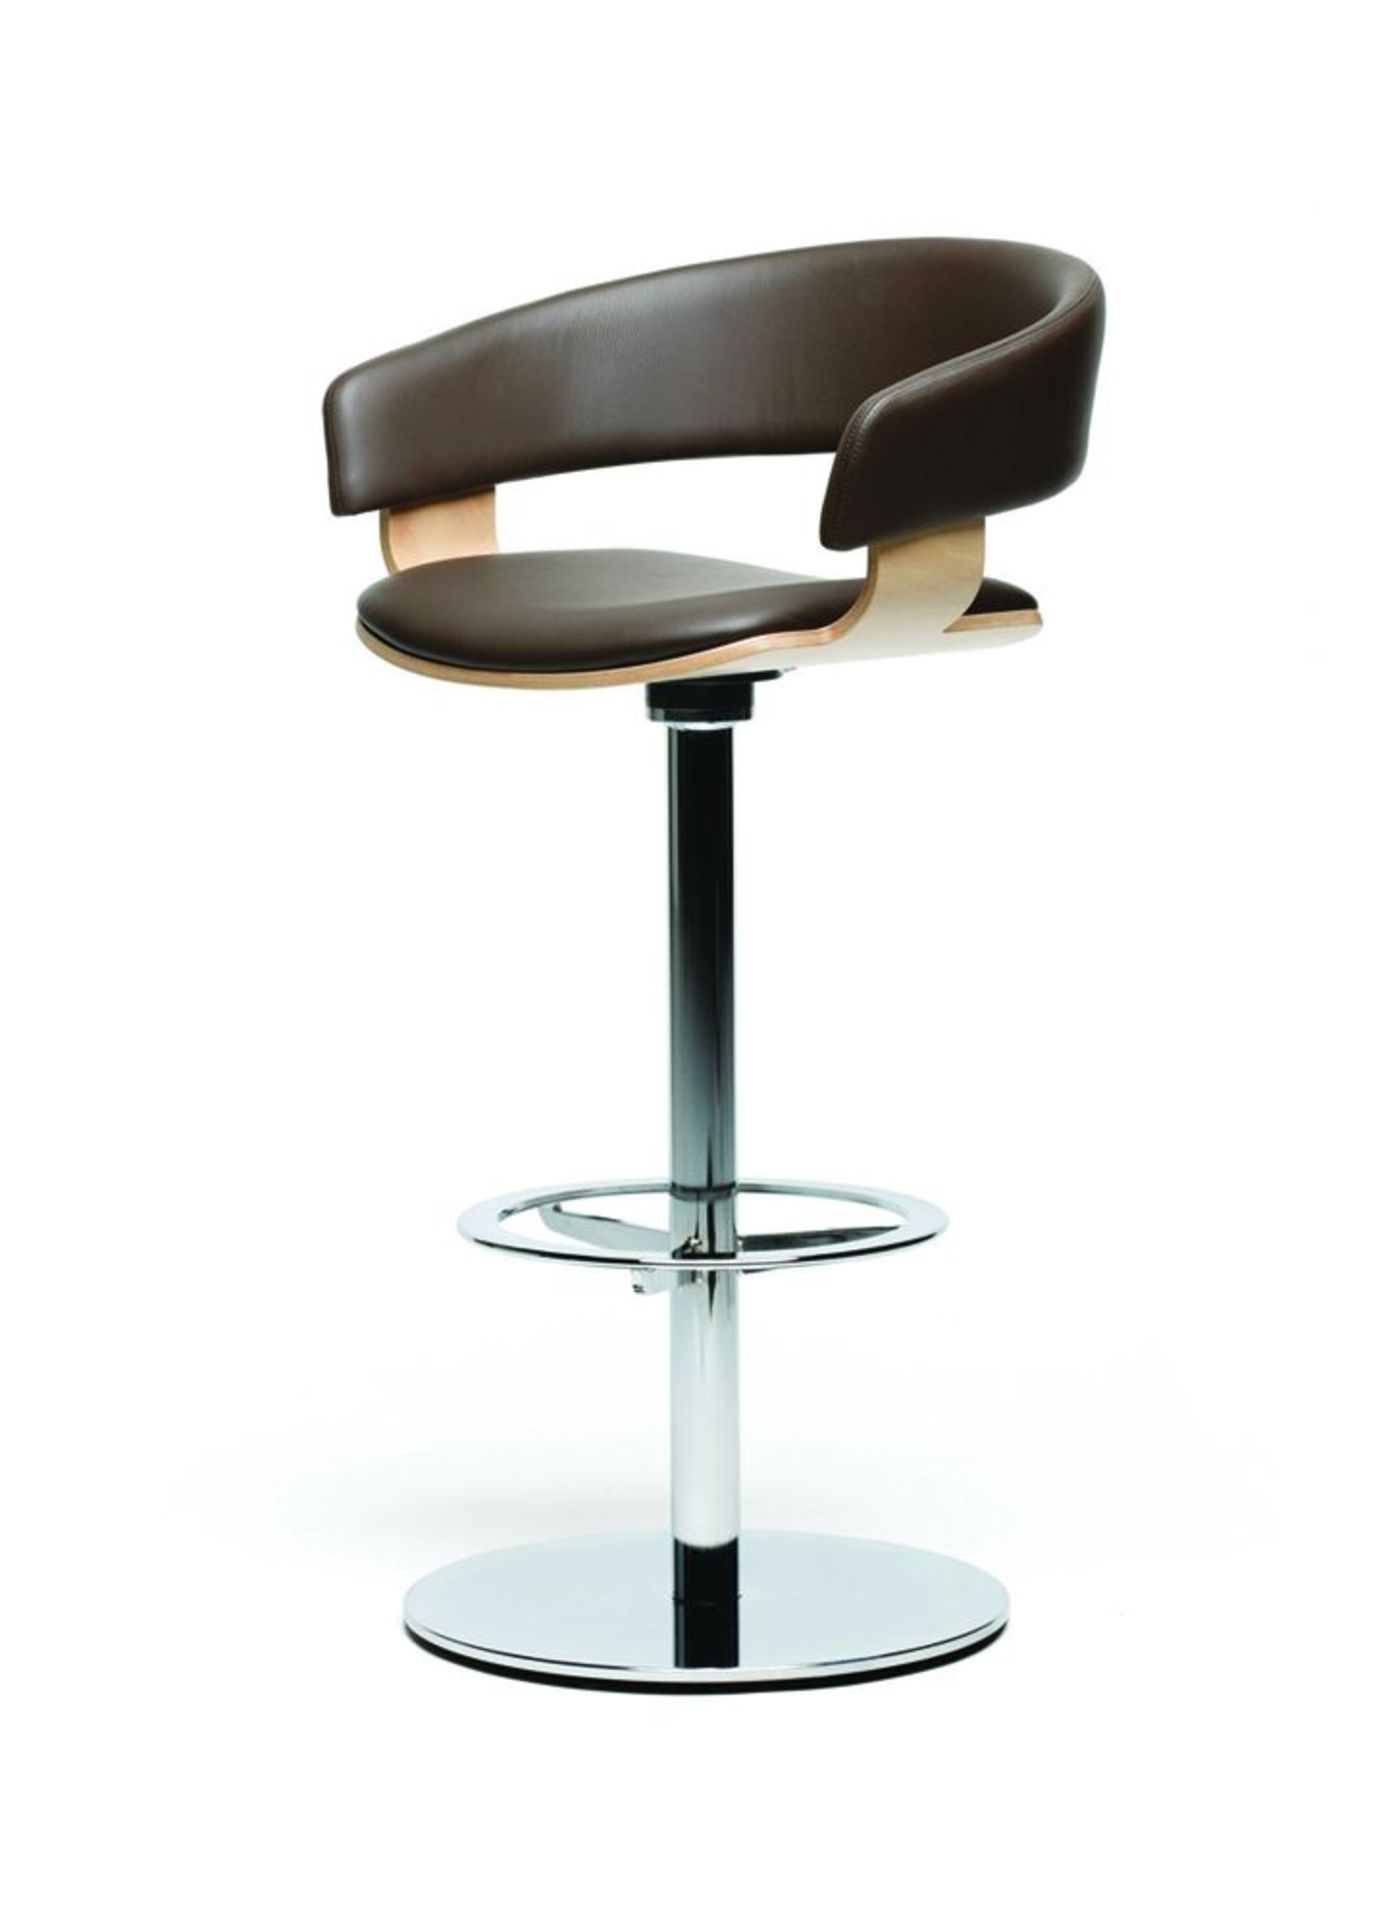 4 x Original Allermuir 'Mollie' Designer Swivel Bar Stools - Features Brown Leather Upholstery, Wood - Image 2 of 9